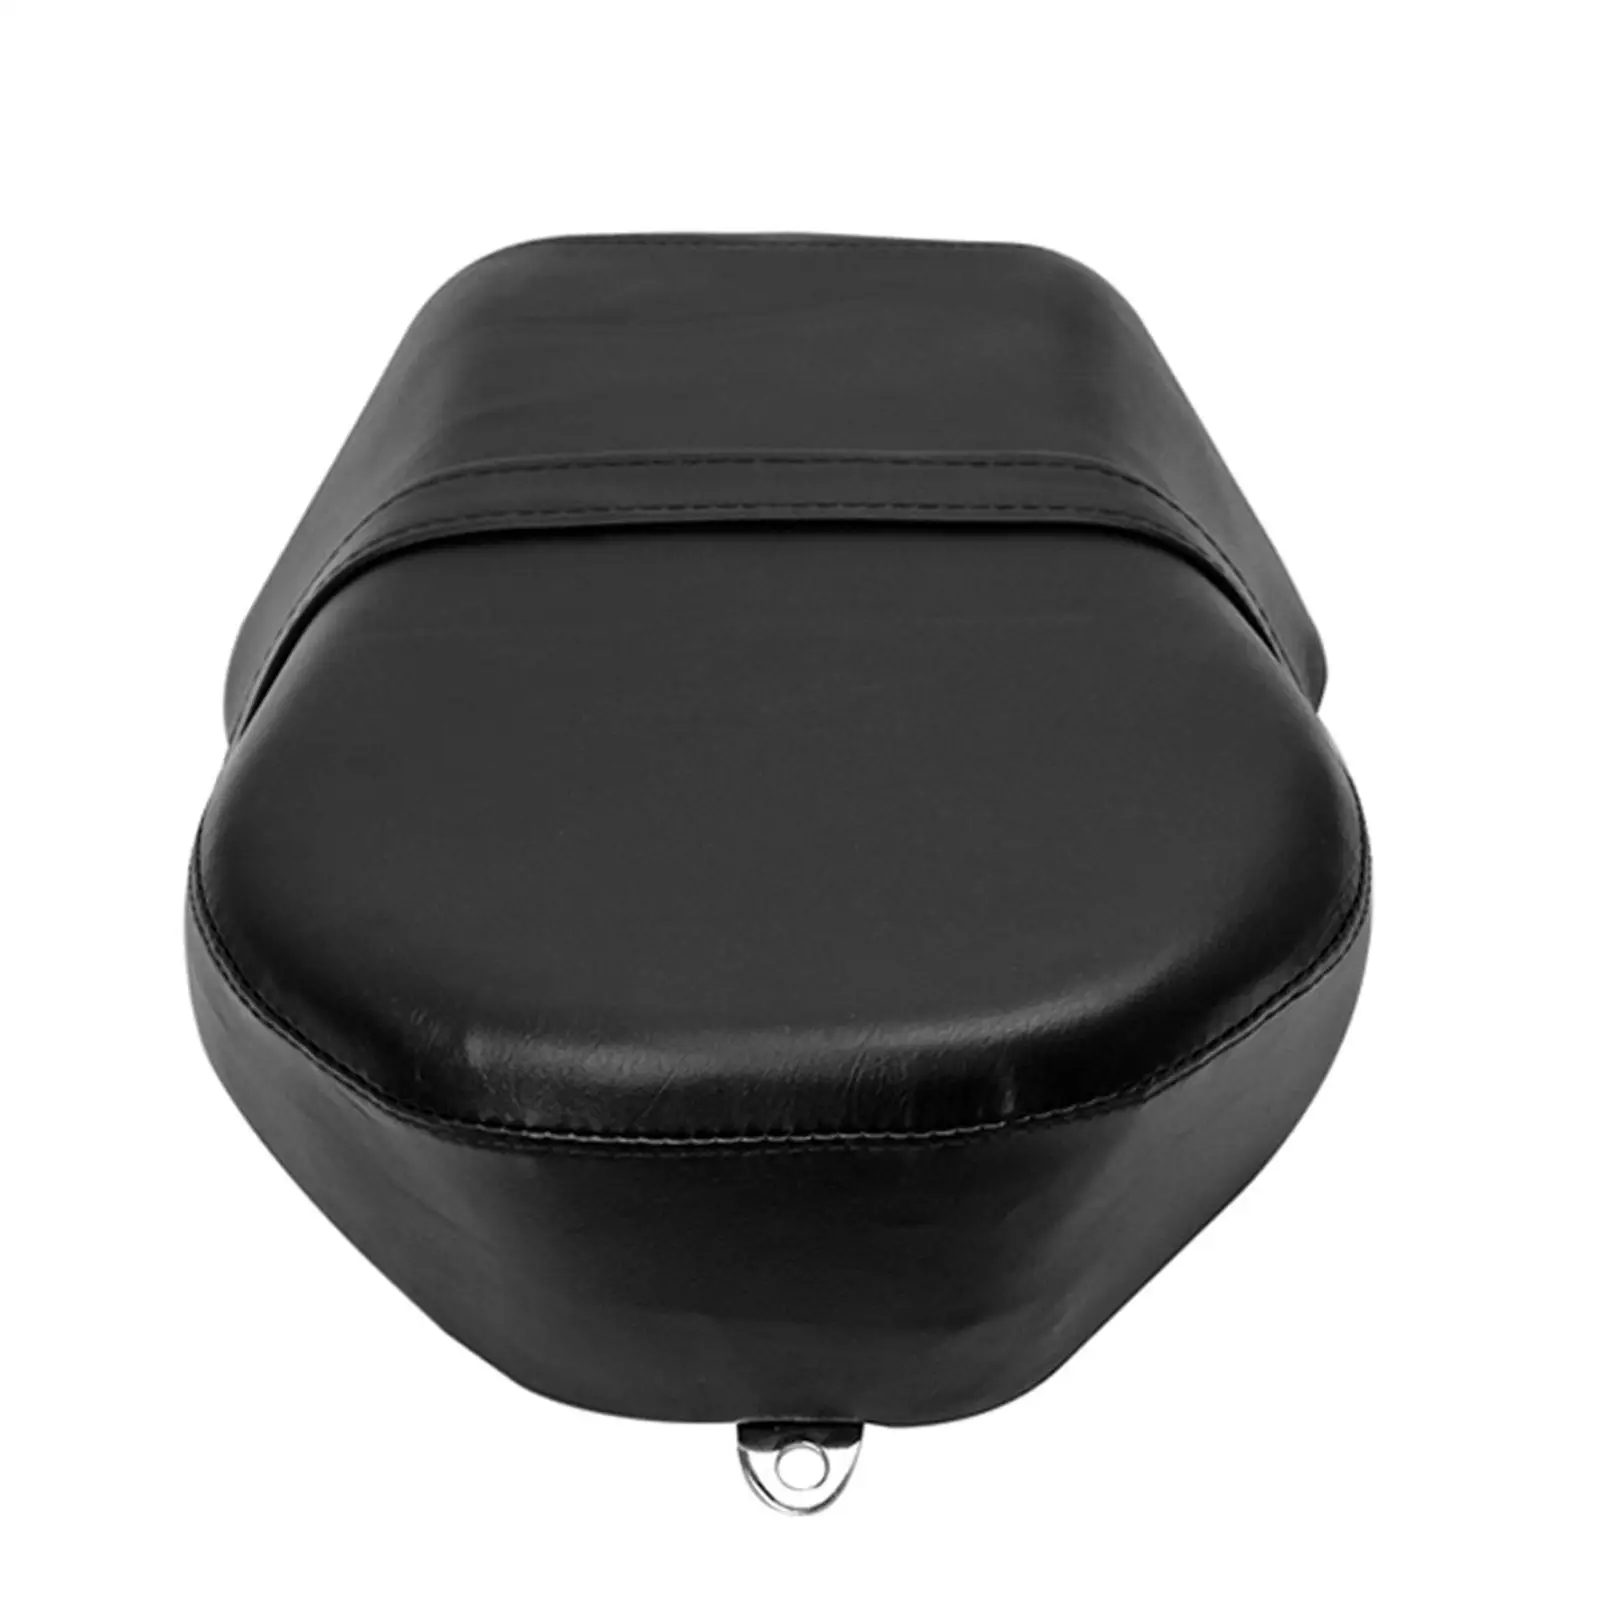 Motorcycle Pillion Cushion Pad Black for Harley Sportster Replacement